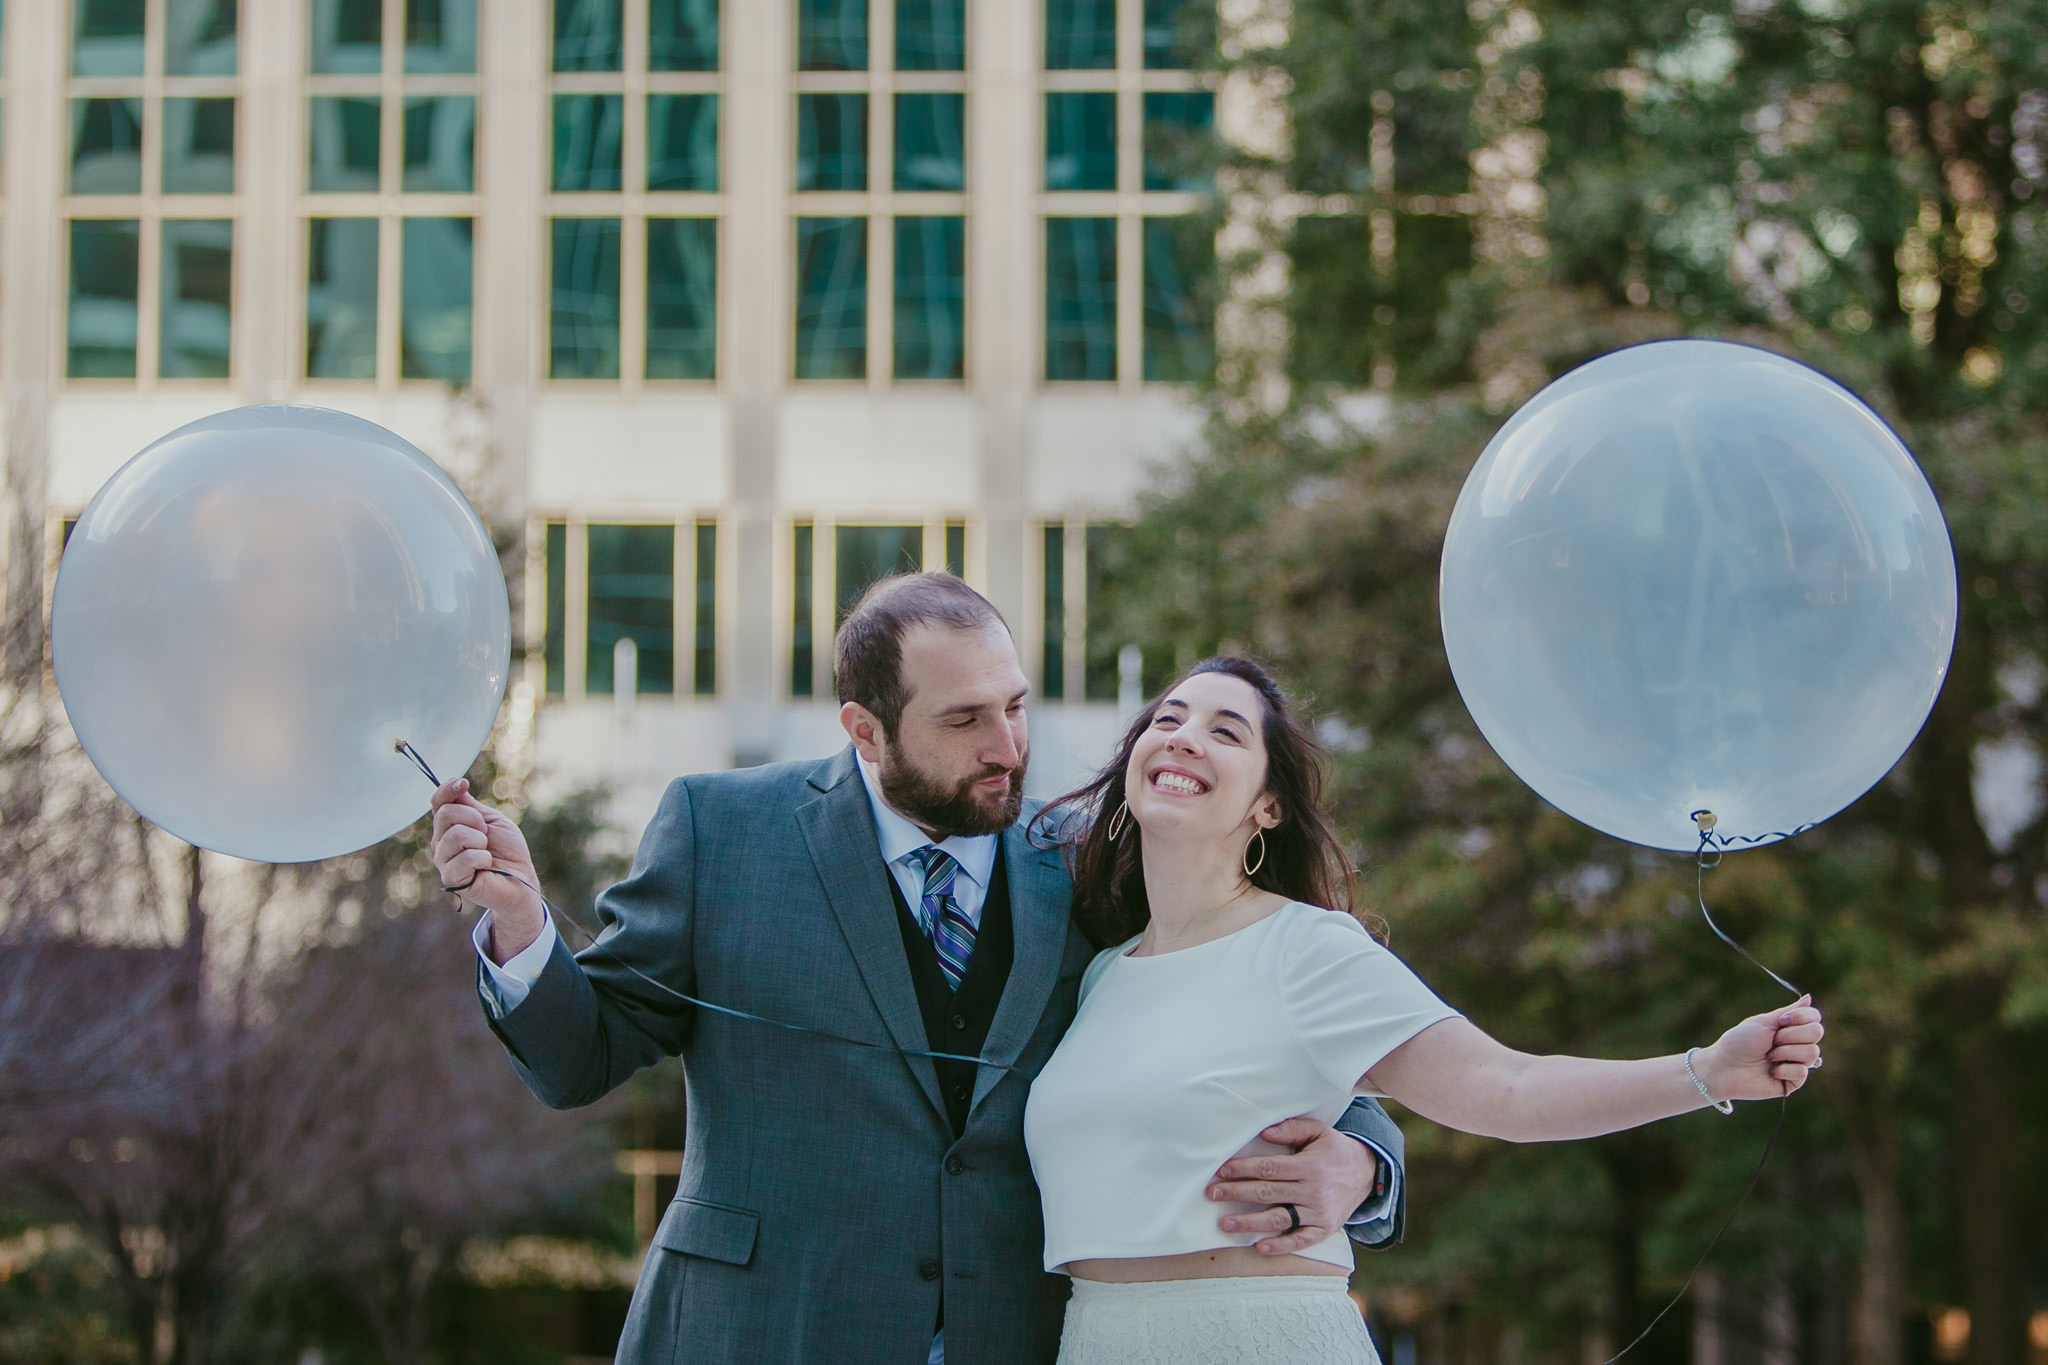 bride and groom laugh with bubble balloons in uptown Charlotte, NC